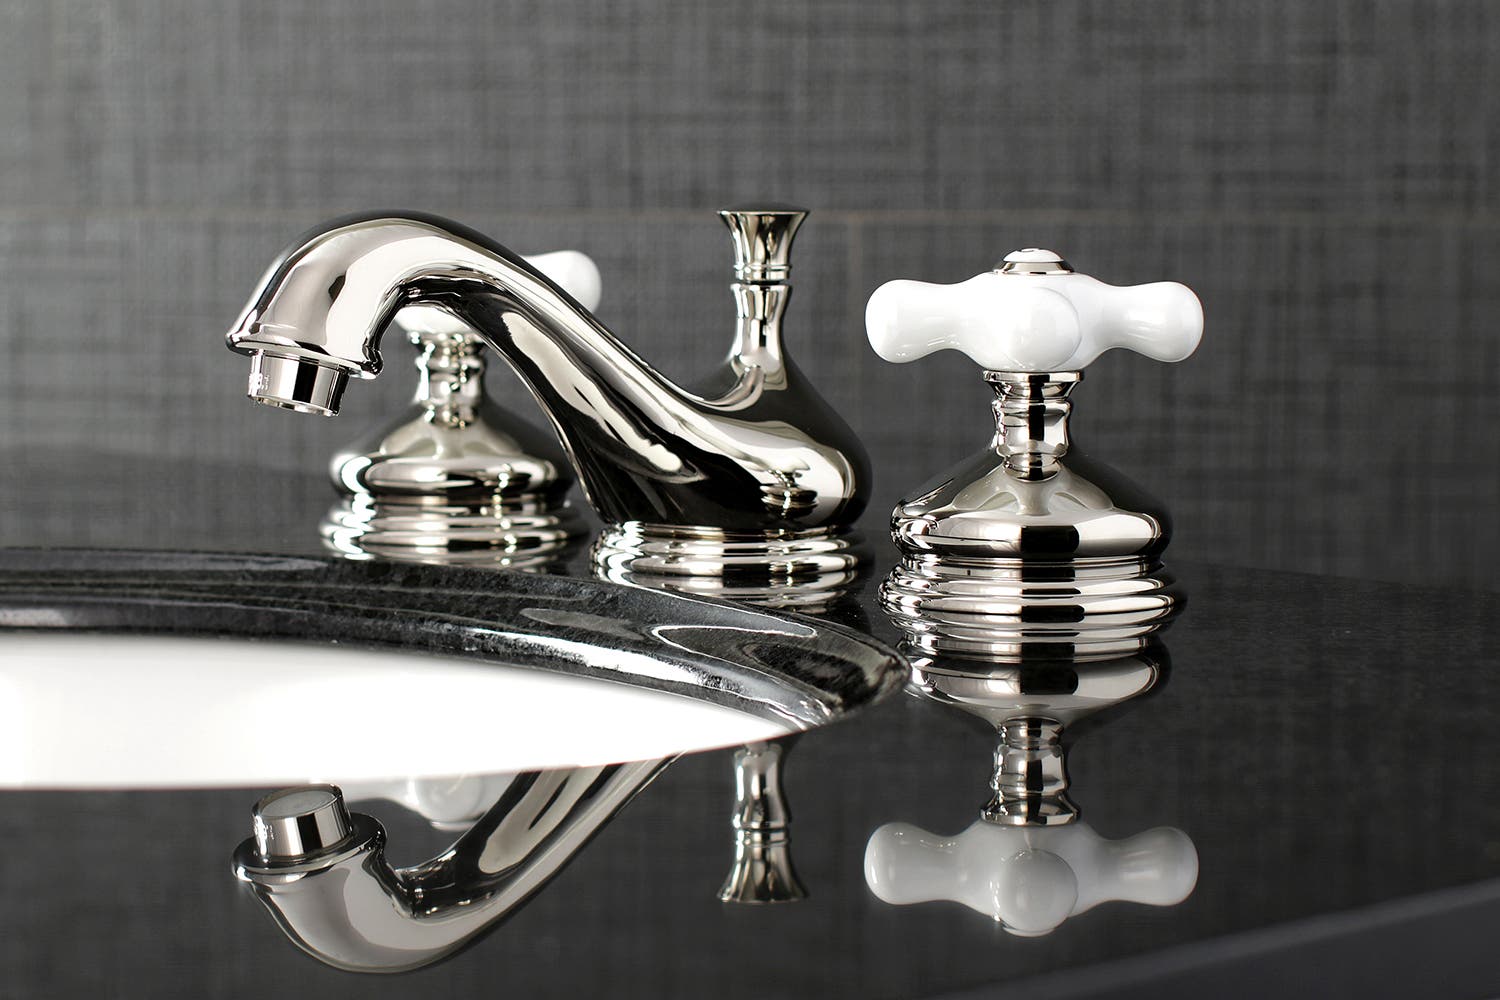 The Kingston Brass Widespread Lavatory Faucet Will #Transform Your #Tuesday, KS1166PX